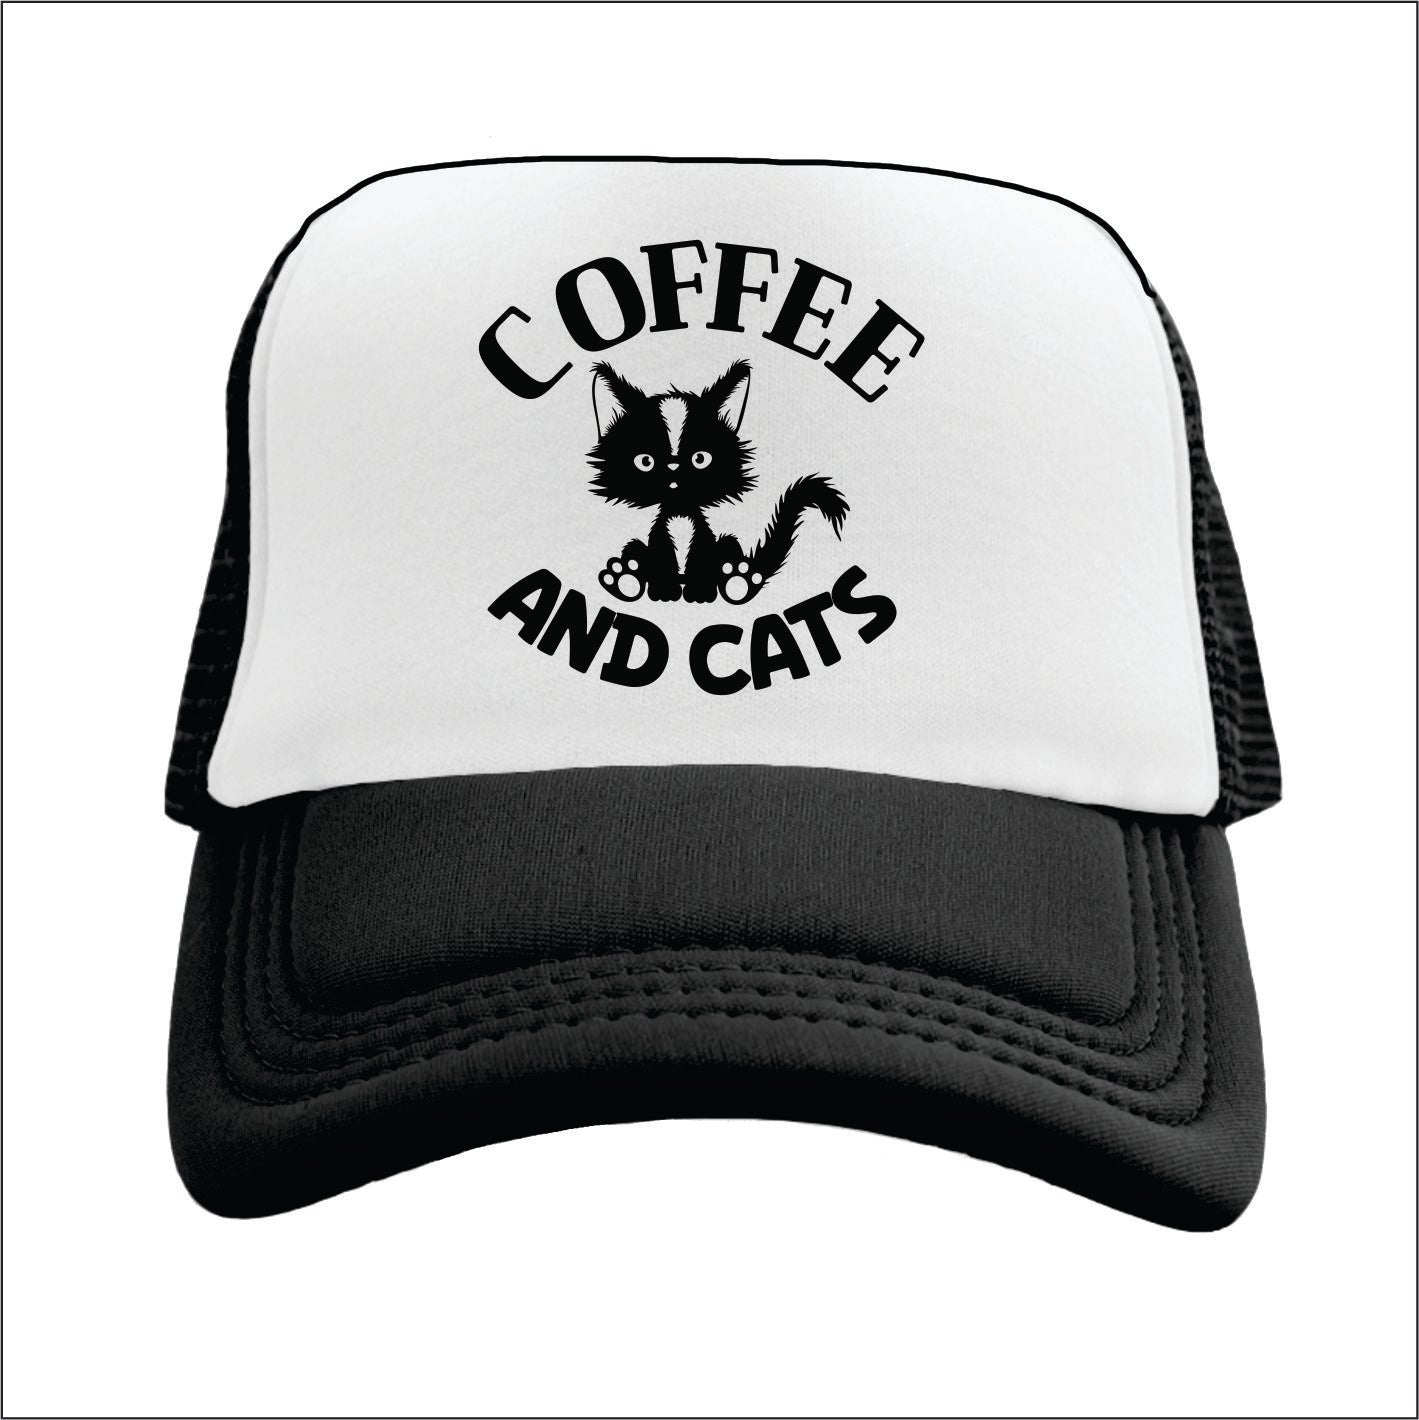 COFFEE AND CATS Trucker Hat